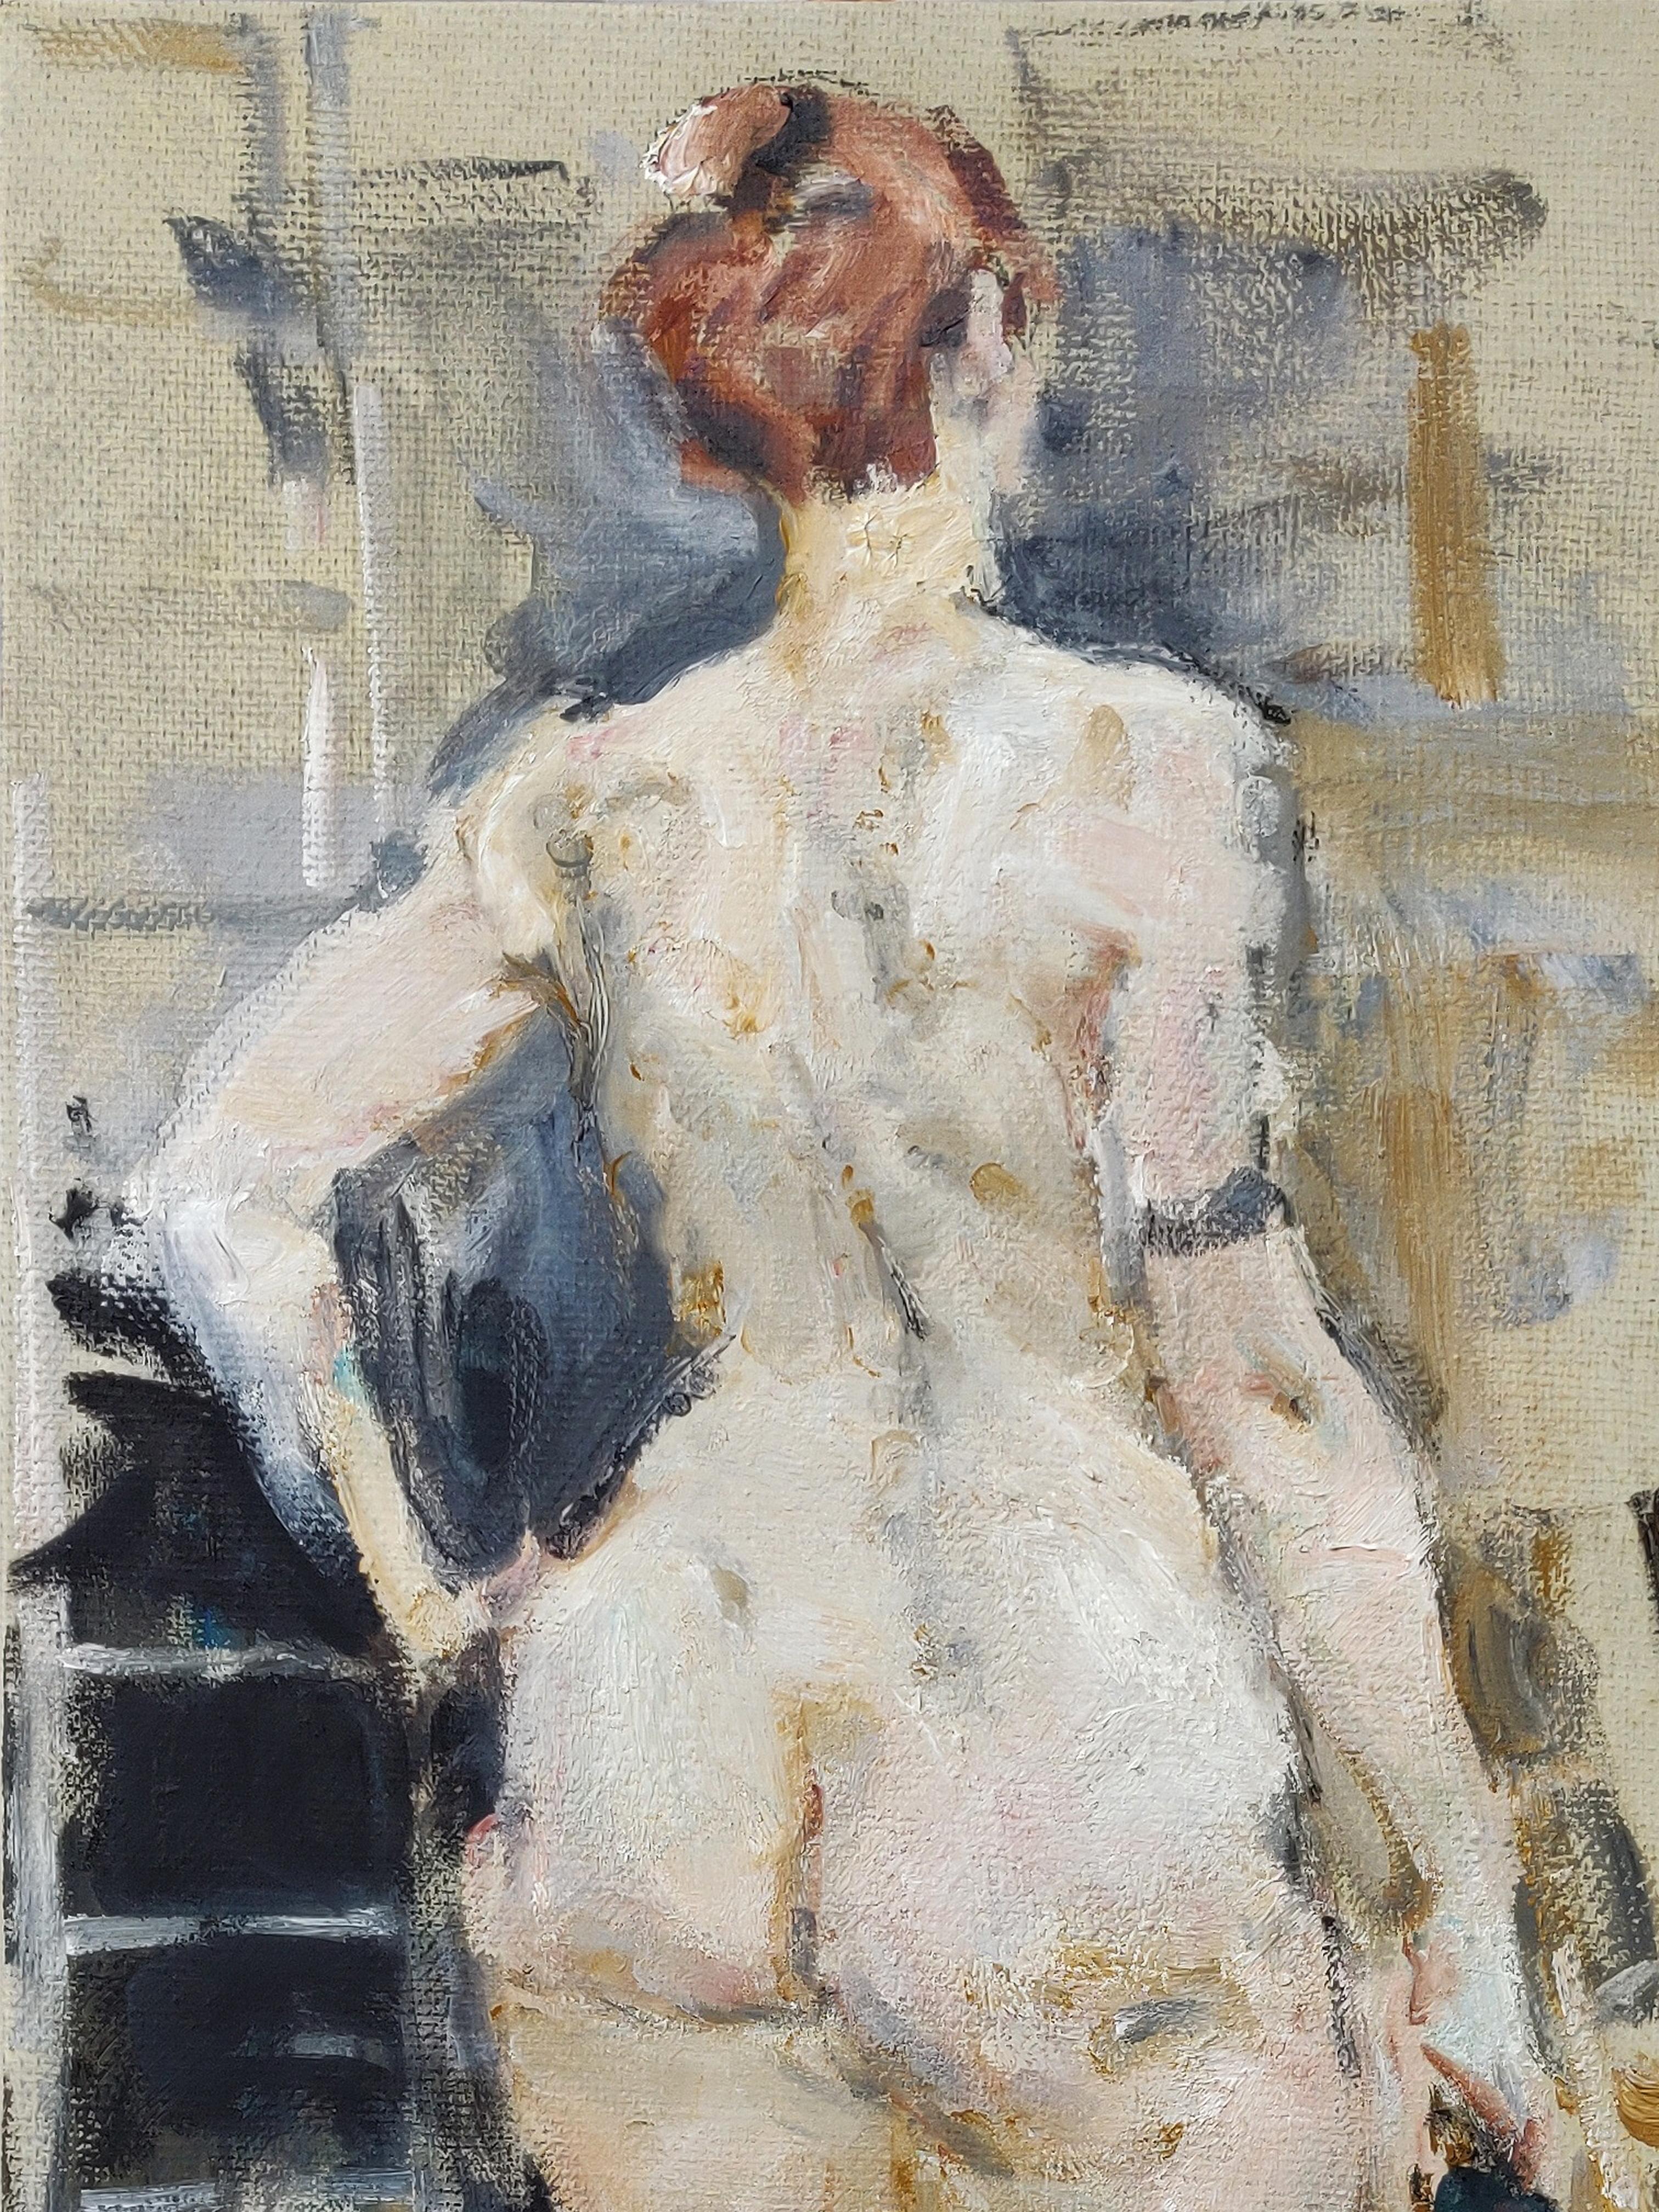 Nude - 21st Century Contemporary Classical Academic Figure Oil Painting - Black Figurative Painting by Yuriy Ushakov